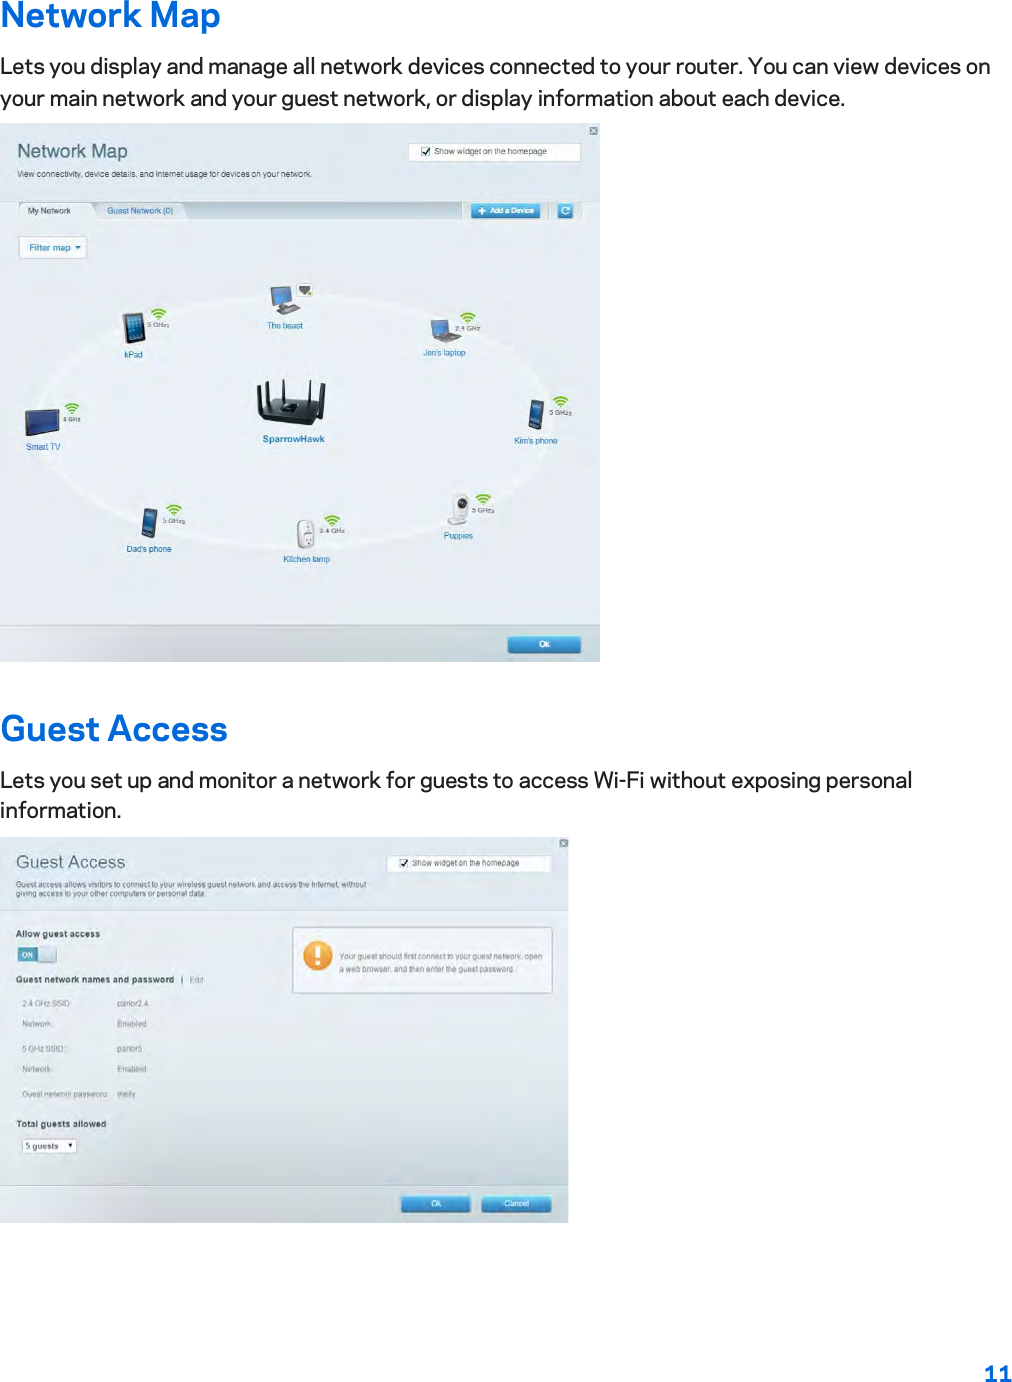 11 Network Map Lets you display and manage all network devices connected to your router. You can view devices on your main network and your guest network, or display information about each device. Guest Access Lets you set up and monitor a network for guests to access Wi-Fi without exposing personal information. 